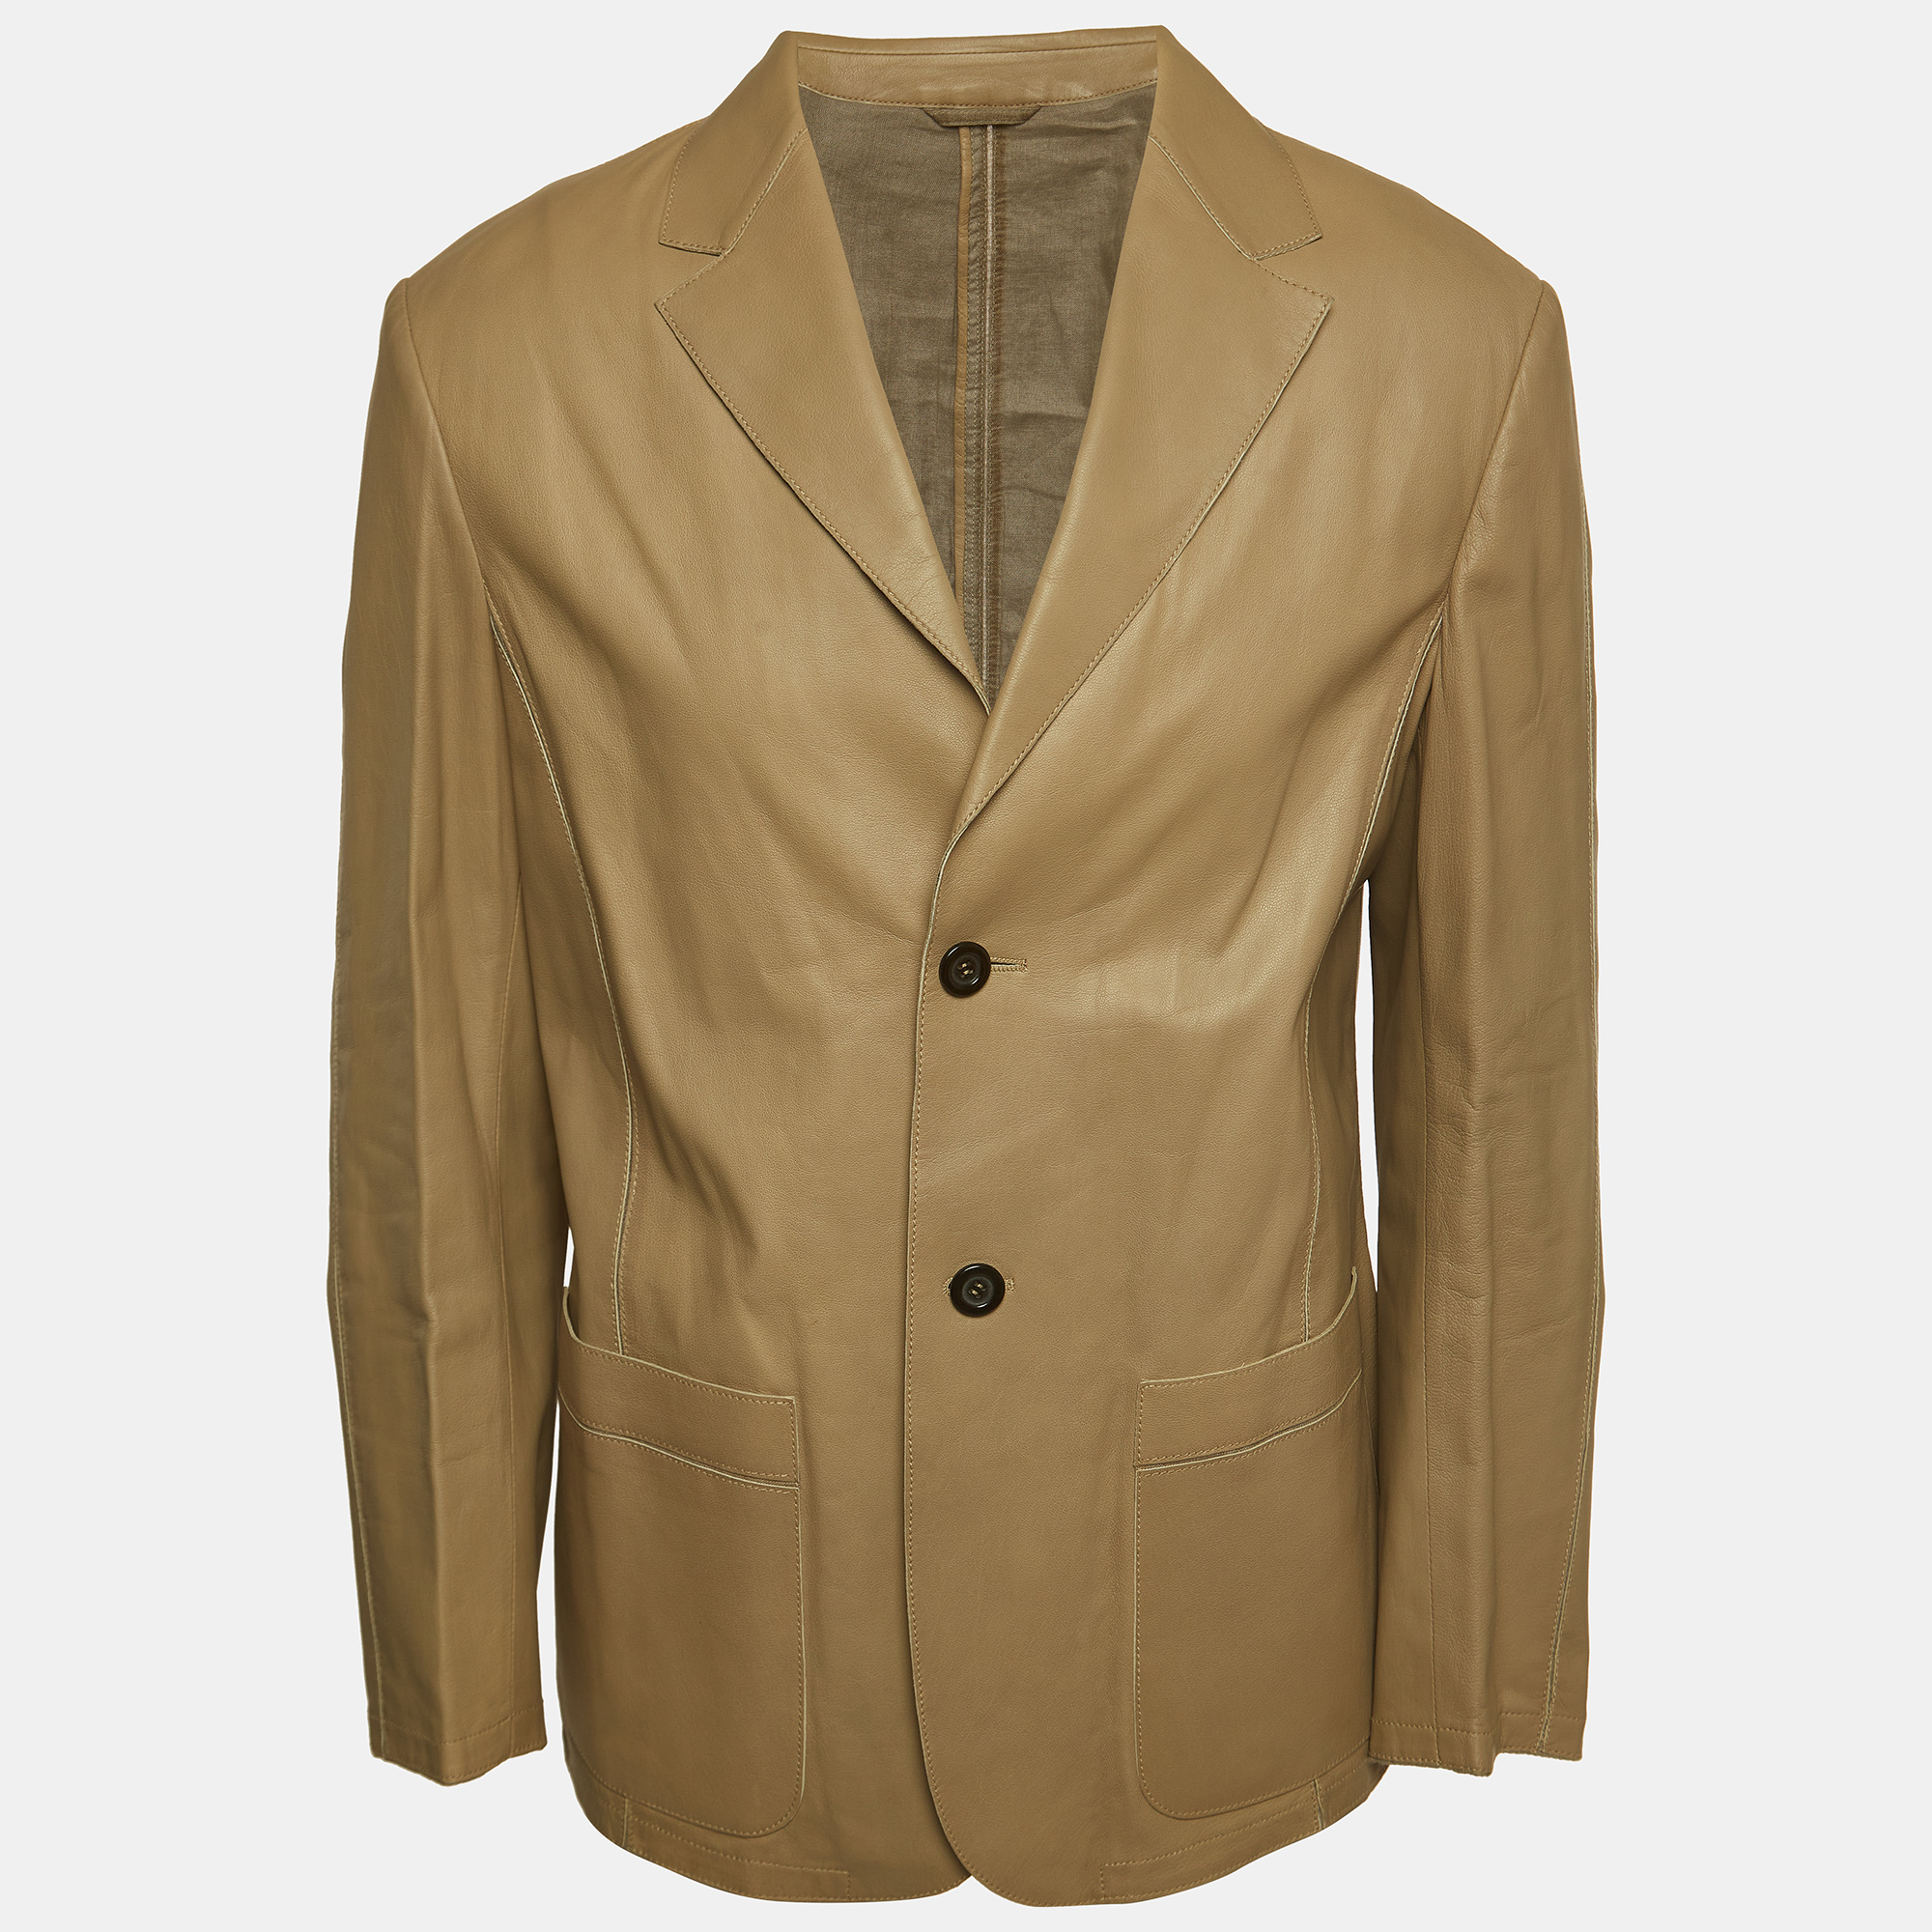 The Giorgio Armani jacket exudes timeless sophistication. Crafted with precision its supple leather showcases a rich light brown hue. The meticulous button detailing adds a touch of refinement making it a versatile and stylish outerwear choice for the discerning fashion enthusiast.